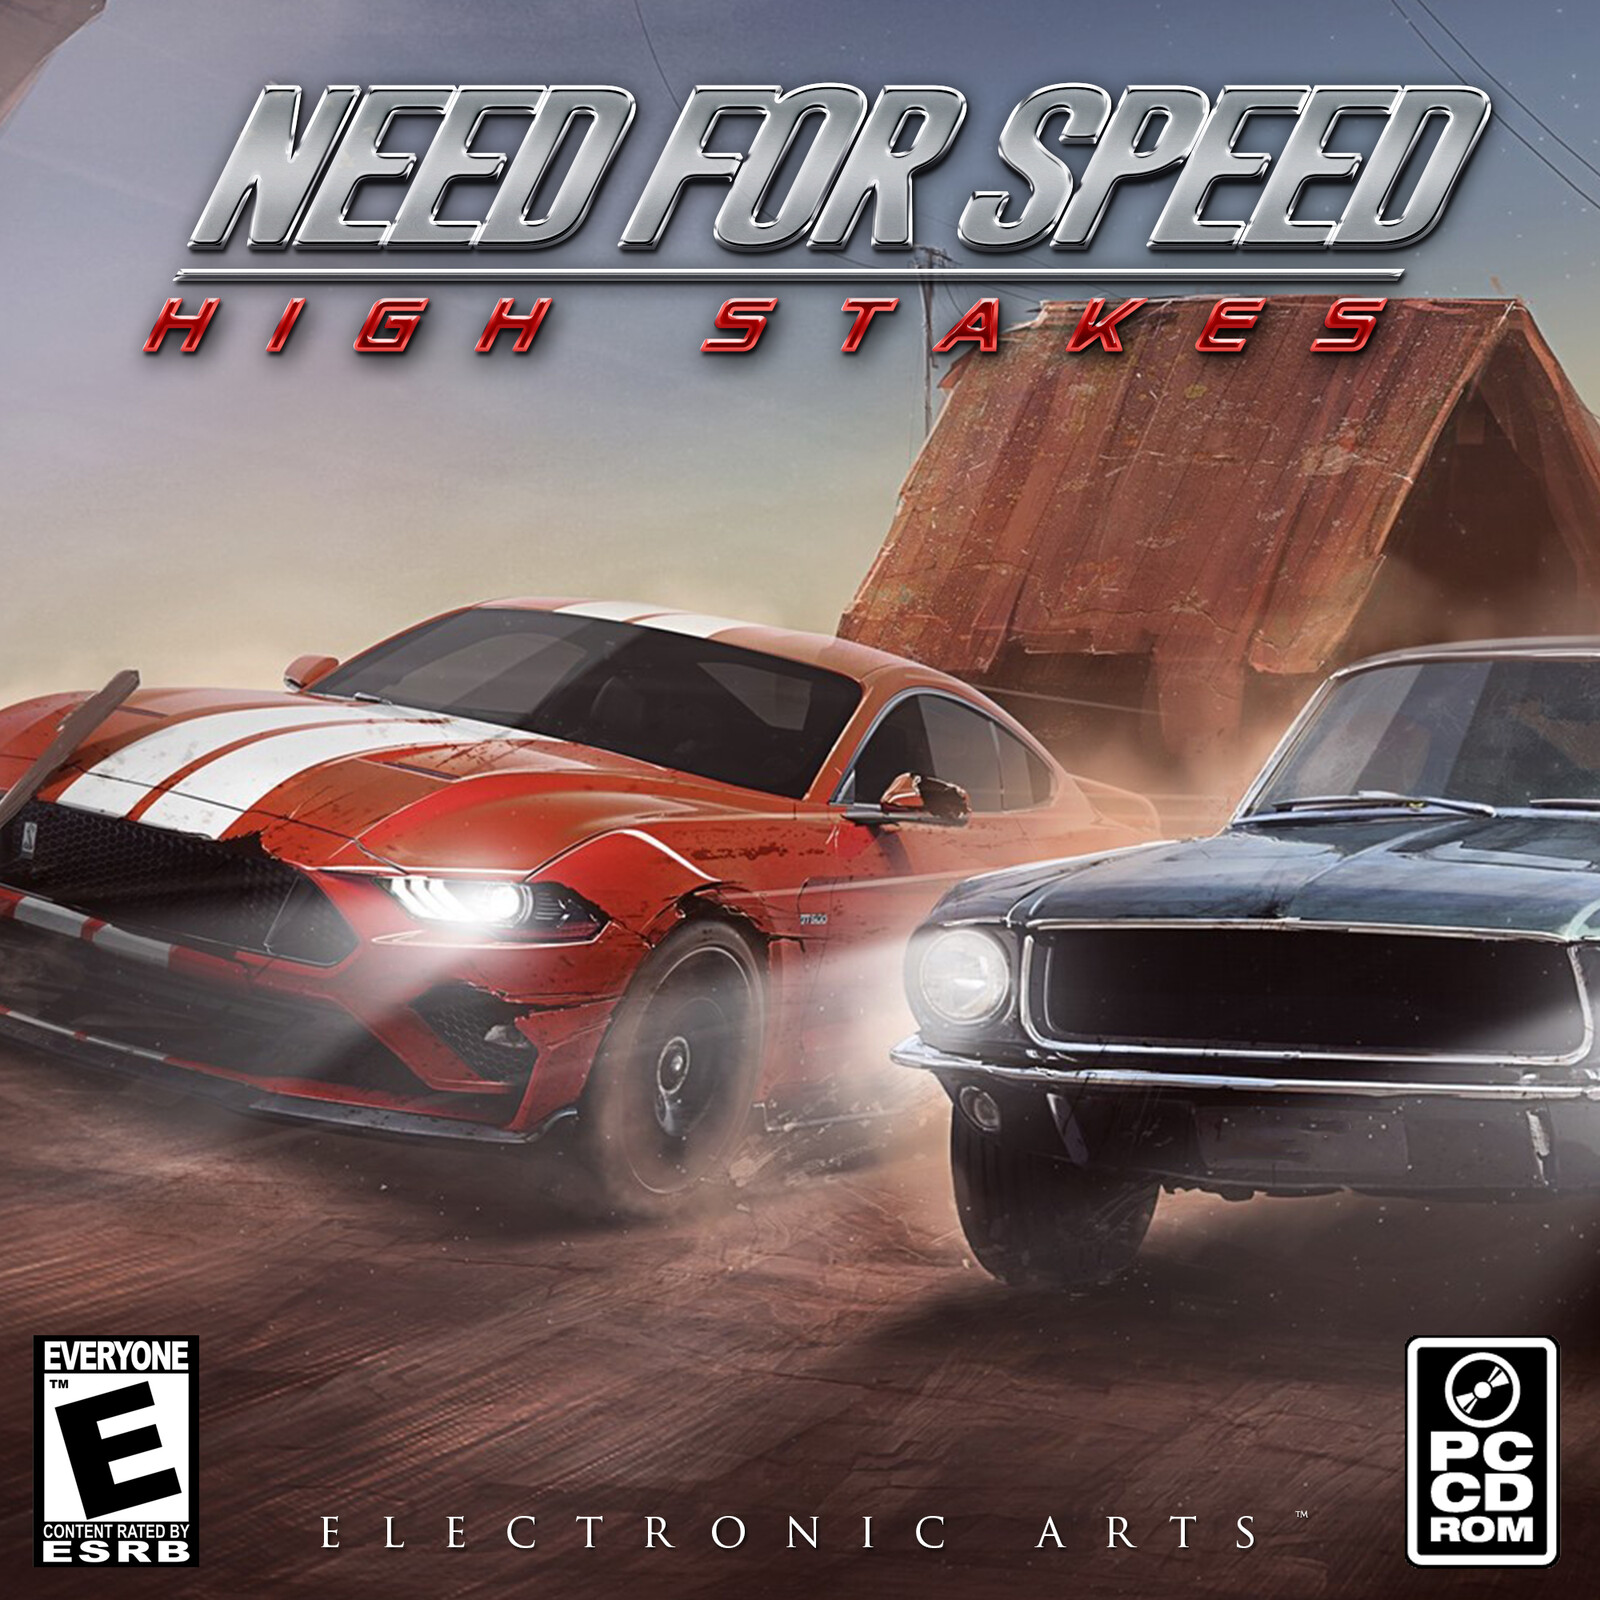 Need for Speed High Stakes (New game, old cover style).